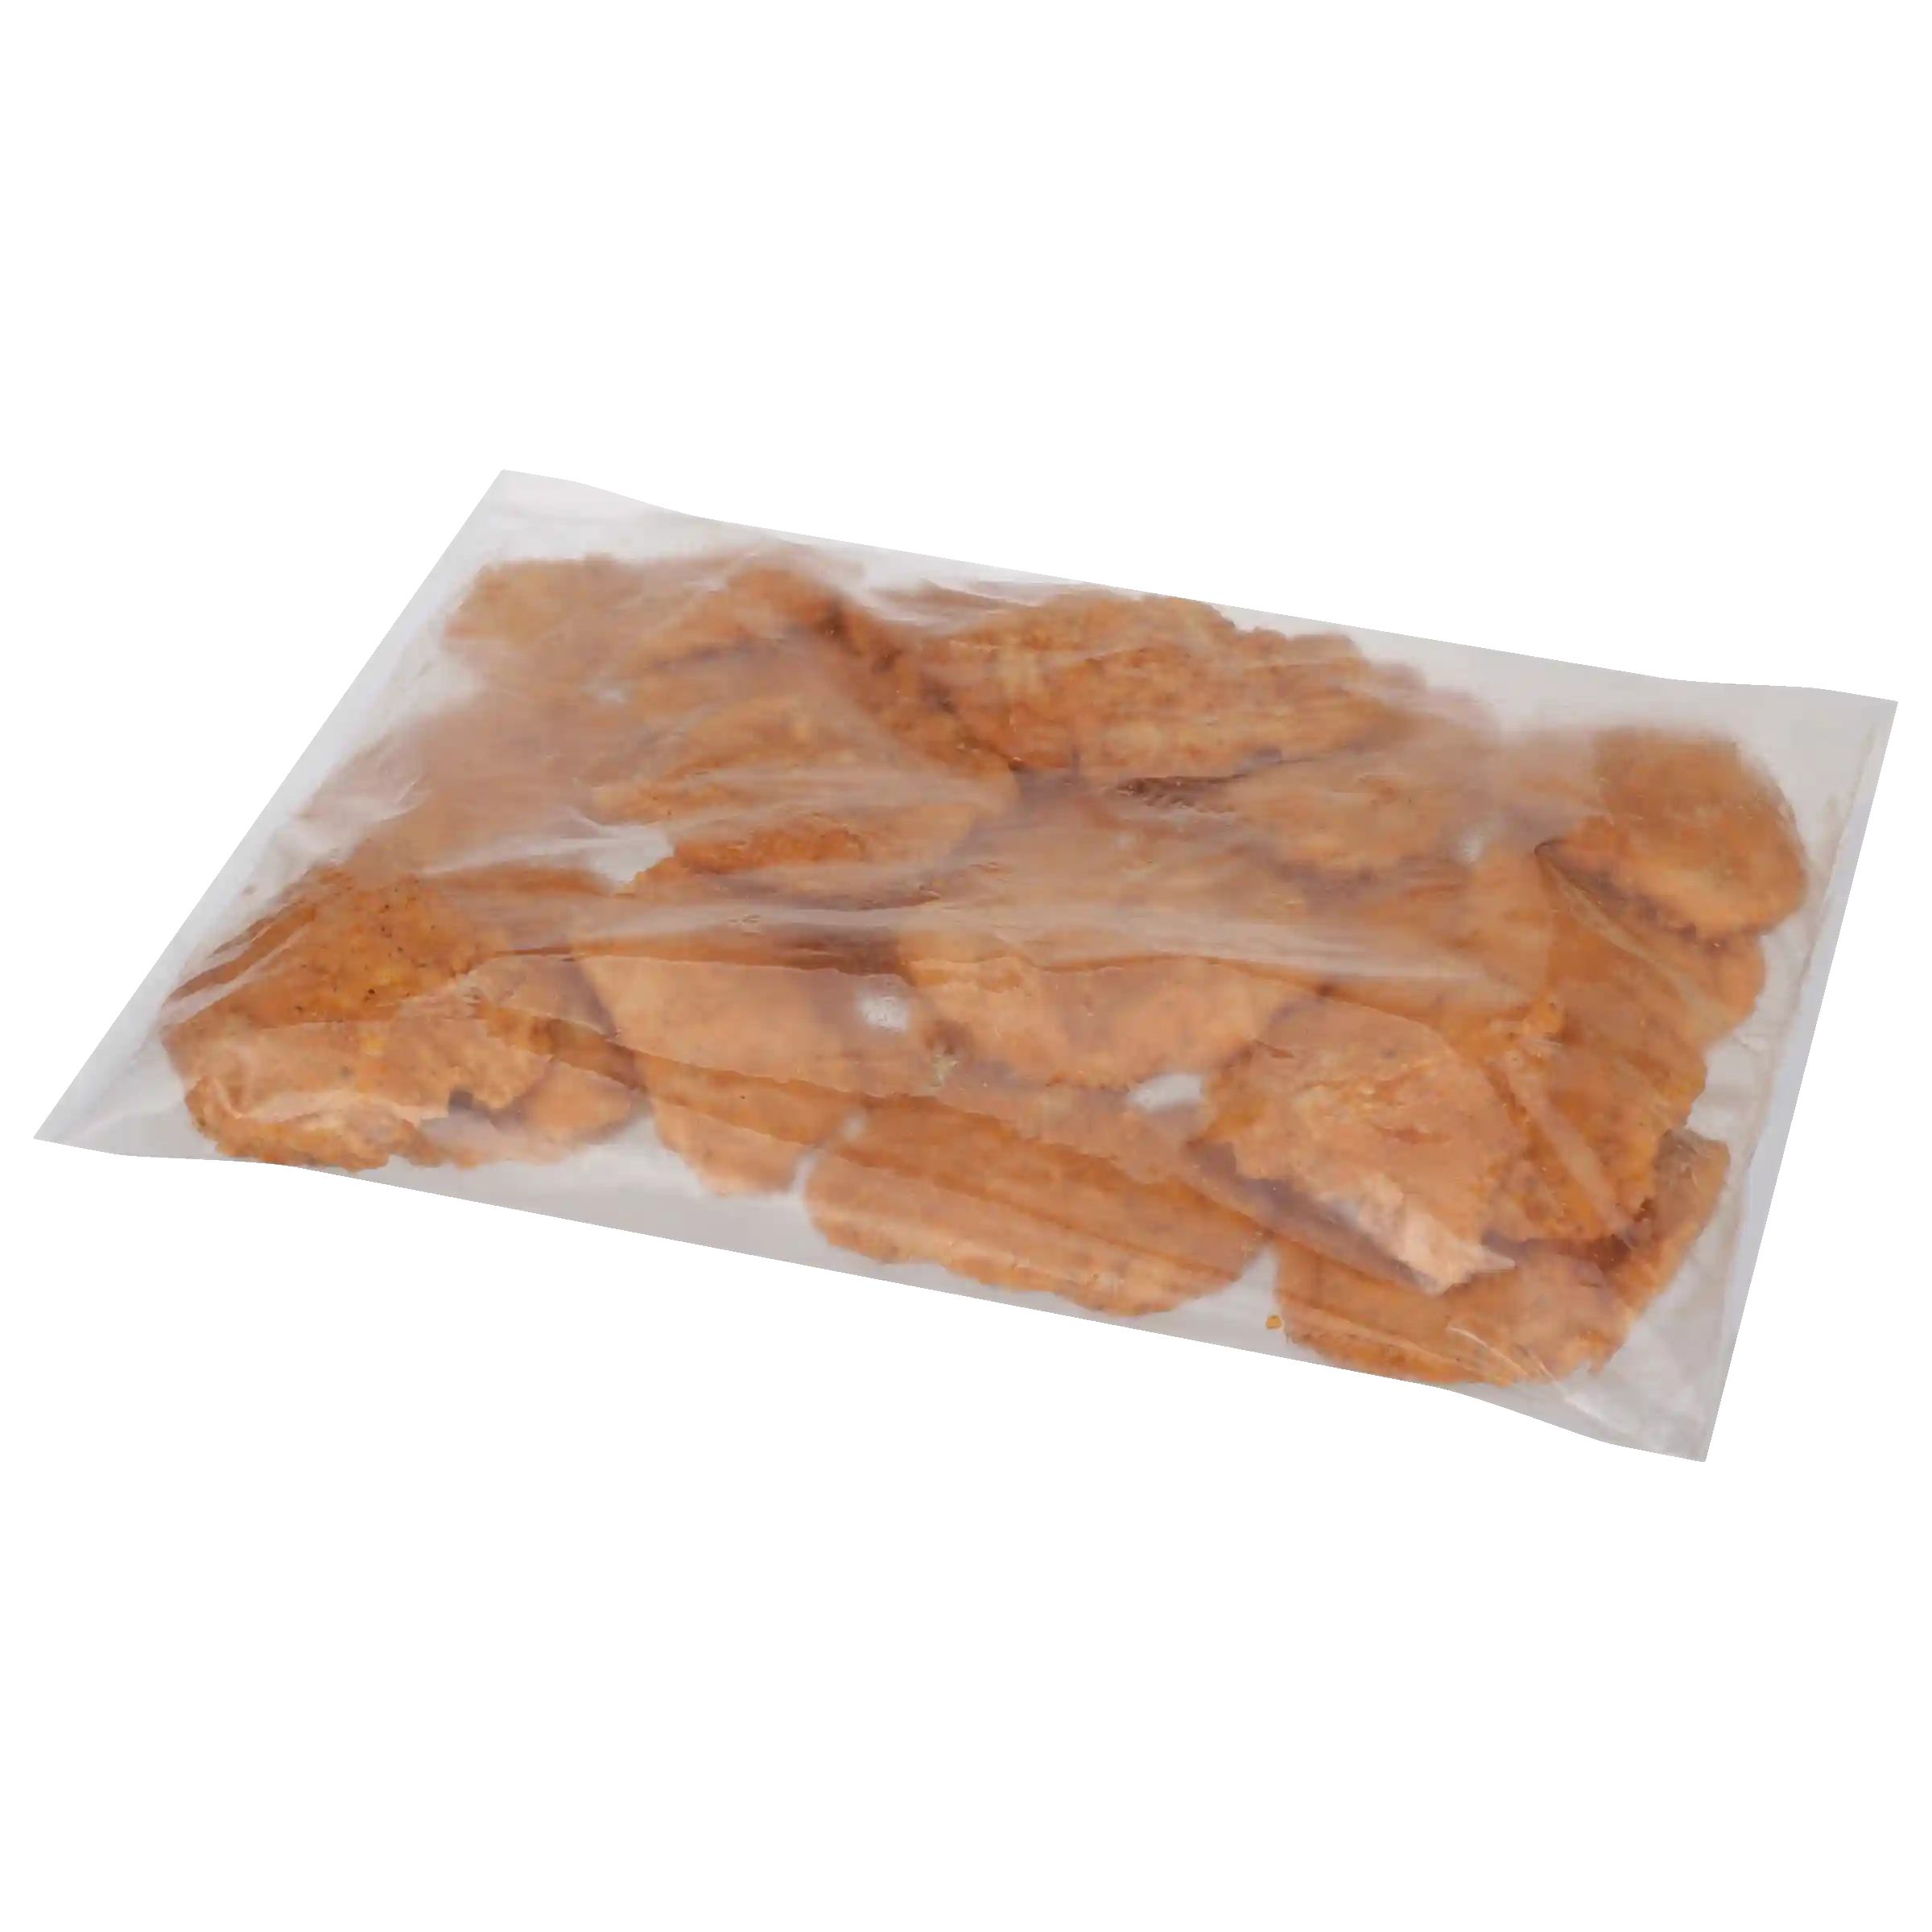 Tyson Red Label® Uncooked Hot & Spicy Chicken Breast Filet Fritters, 4 oz. _image_11